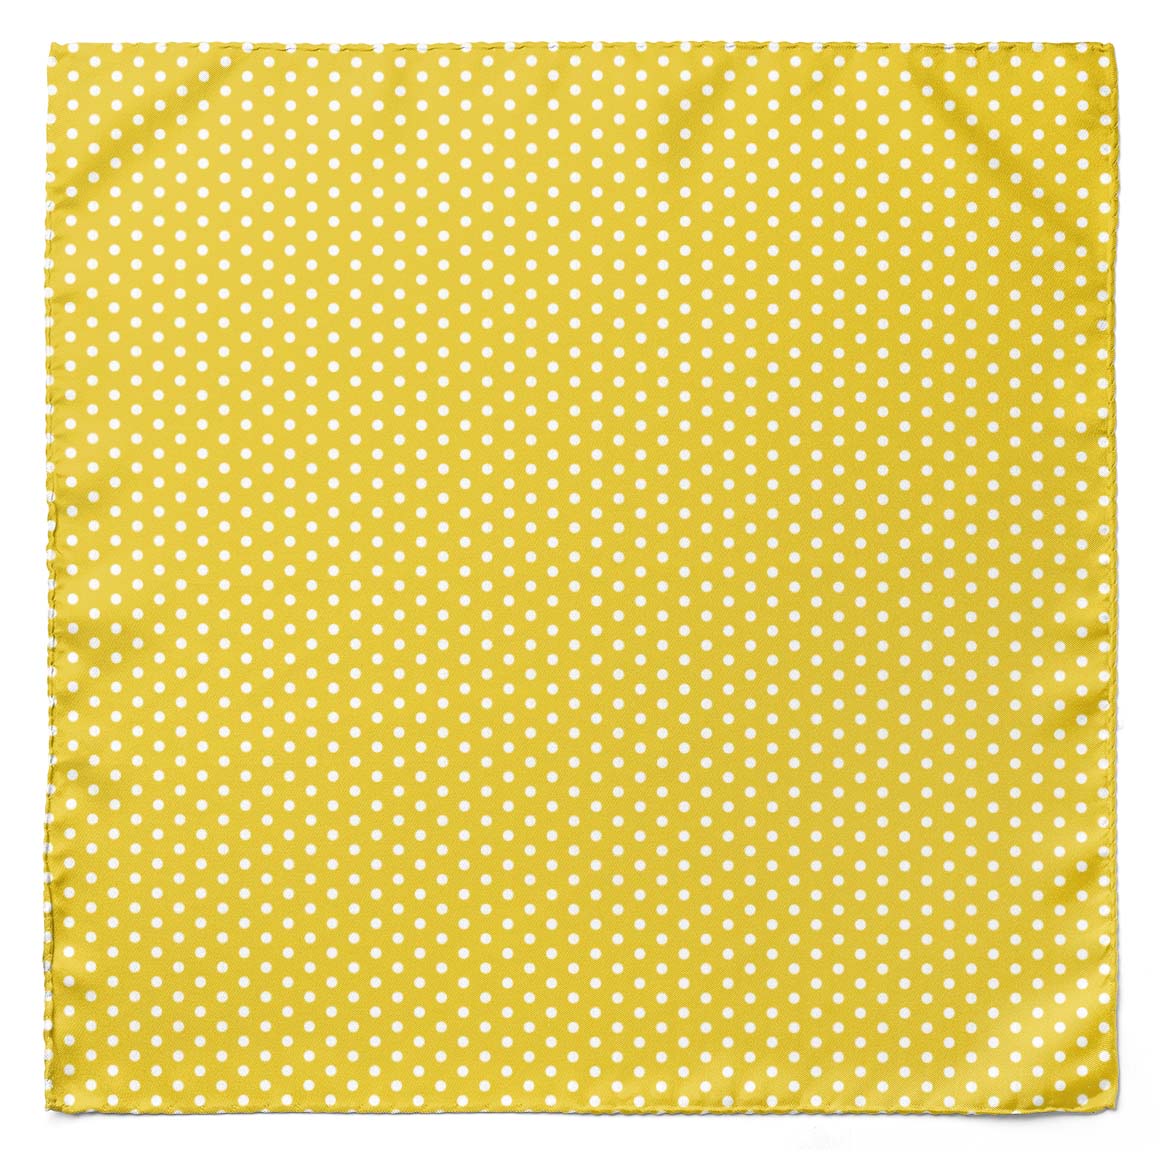 Yellow with White Polka Dots Silk Pocket Square